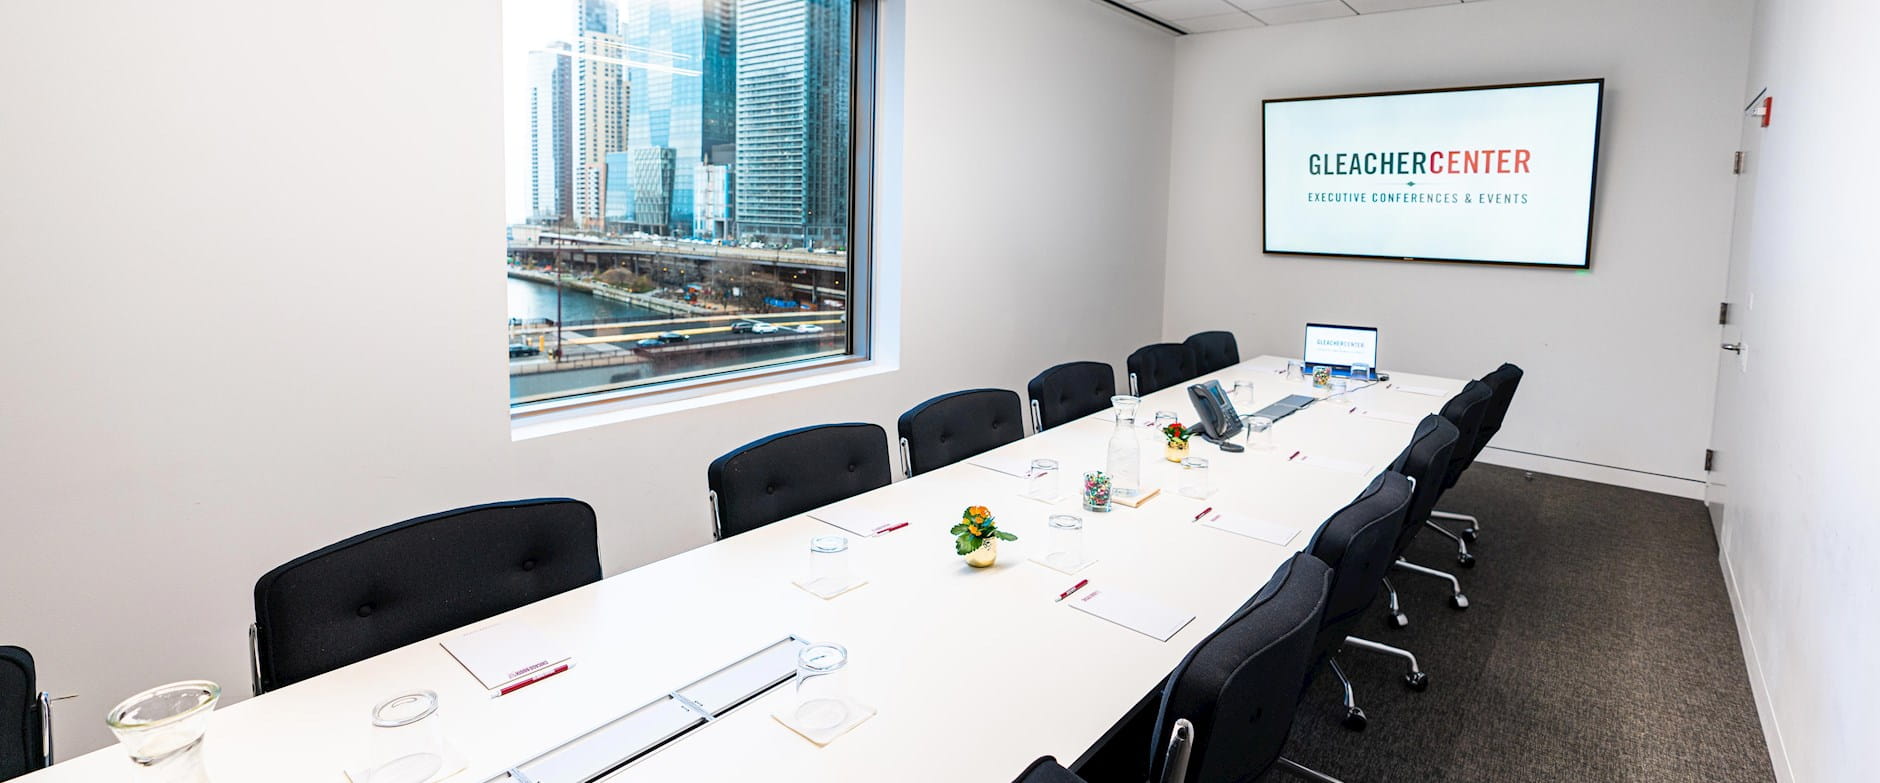 Set boardroom table in the Gleacher Center with a presentation screen and laptop